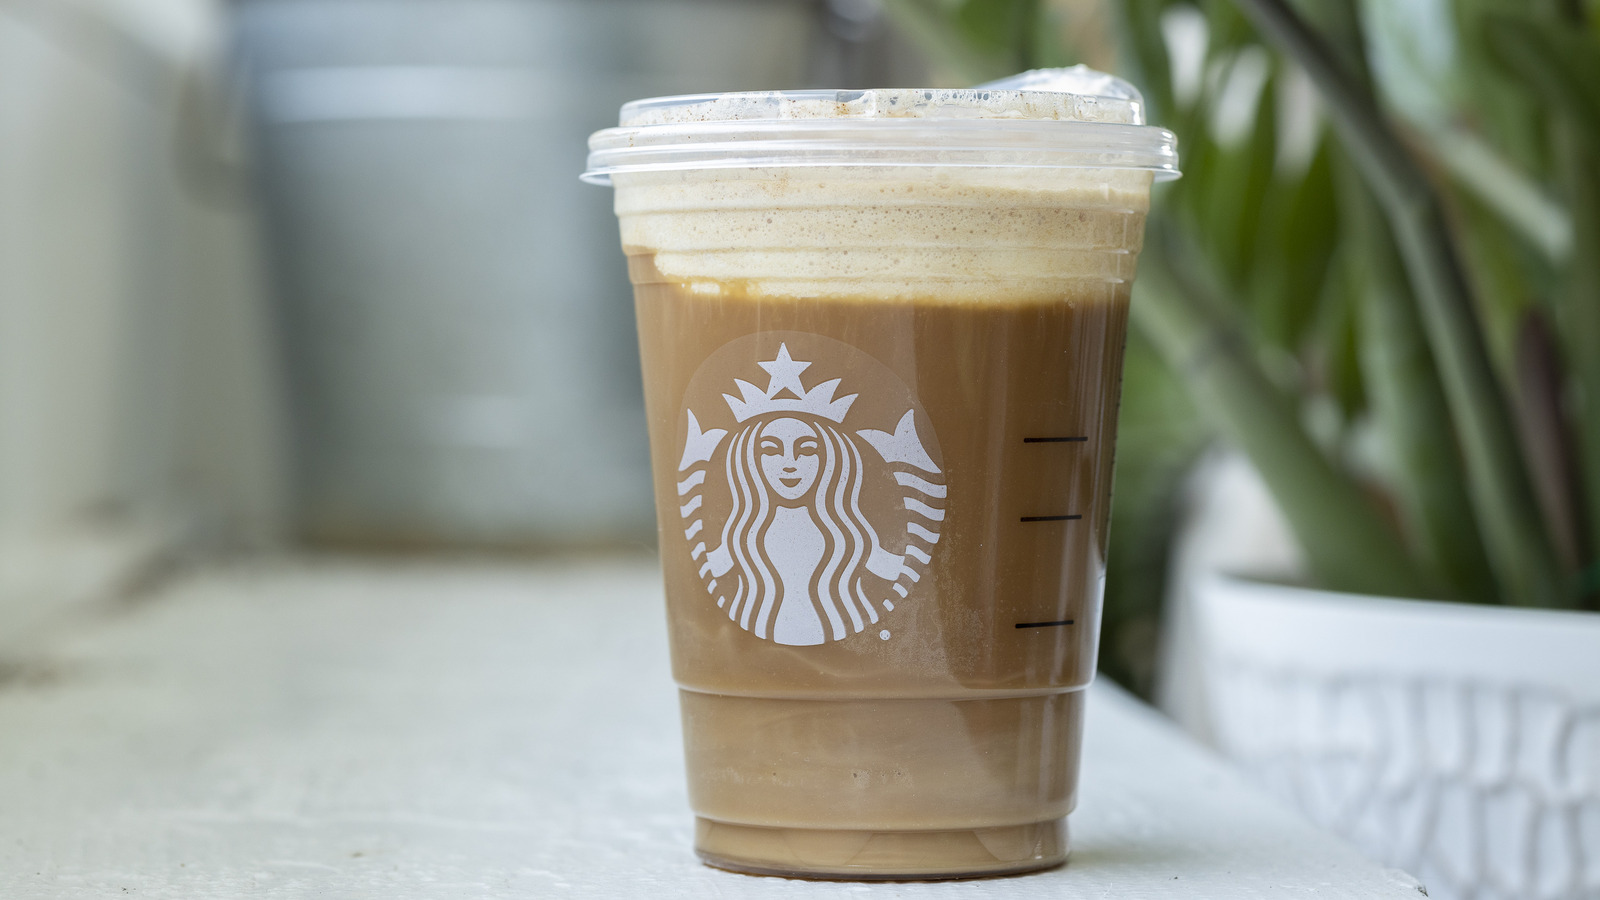 https://www.mashed.com/img/gallery/we-tried-starbucks-new-cinnamon-caramel-cream-nitro-cold-brew-deliciousness-doesnt-have-to-be-groundbreaking/l-intro-1678285731.jpg